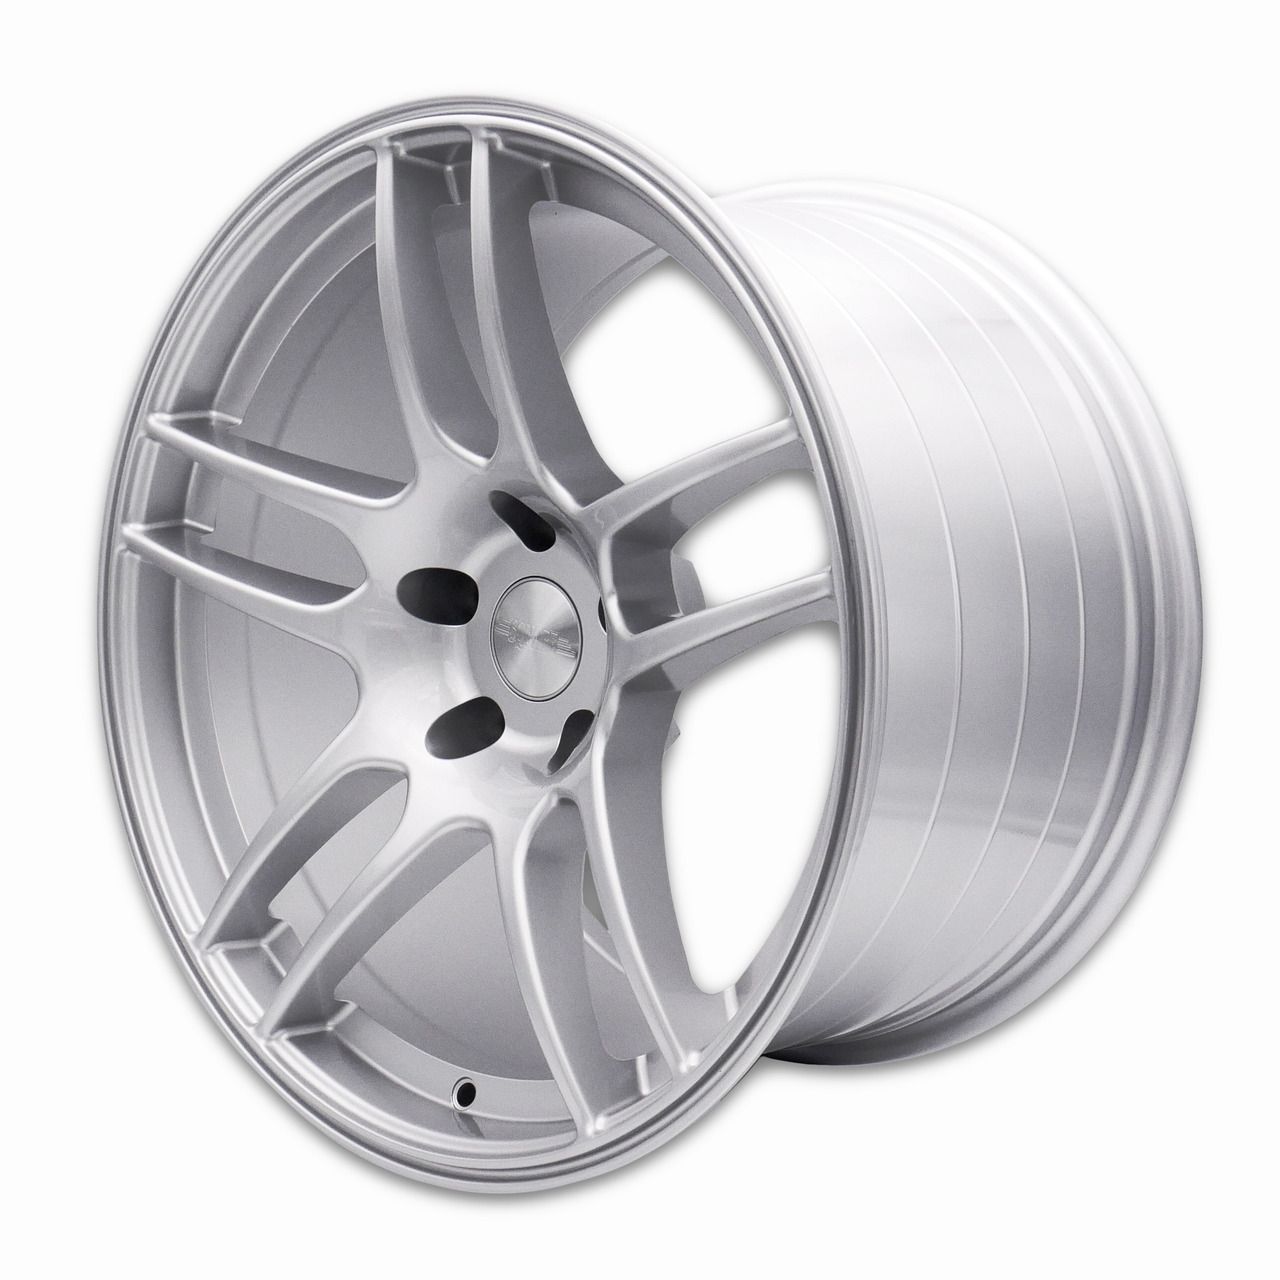 SQUARE Wheels - Flow Formed G33 R Model - 18x10.5 +15 5x114.3 - Silver